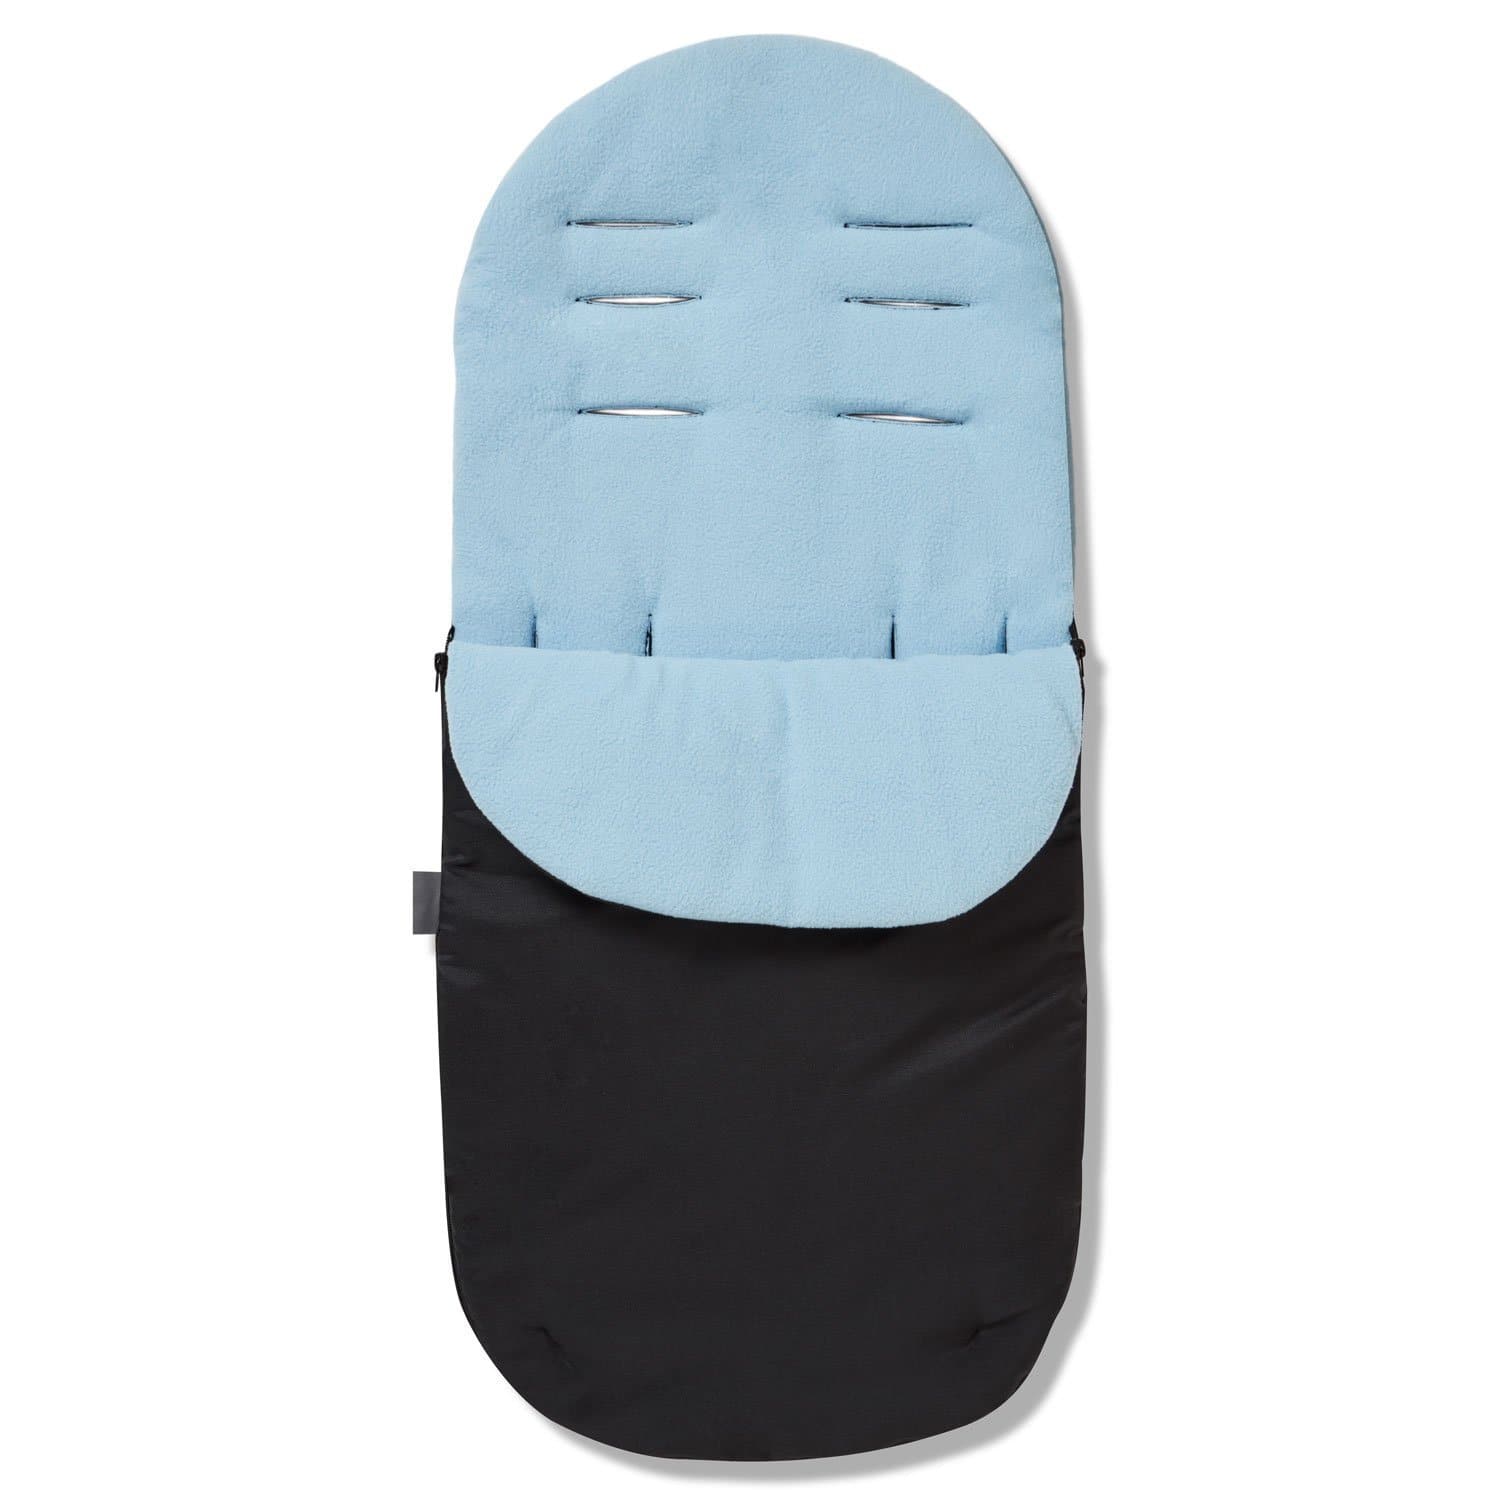 Footmuff / Cosy Toes Compatible with Mutsy - Light Blue / Fits All Models | For Your Little One